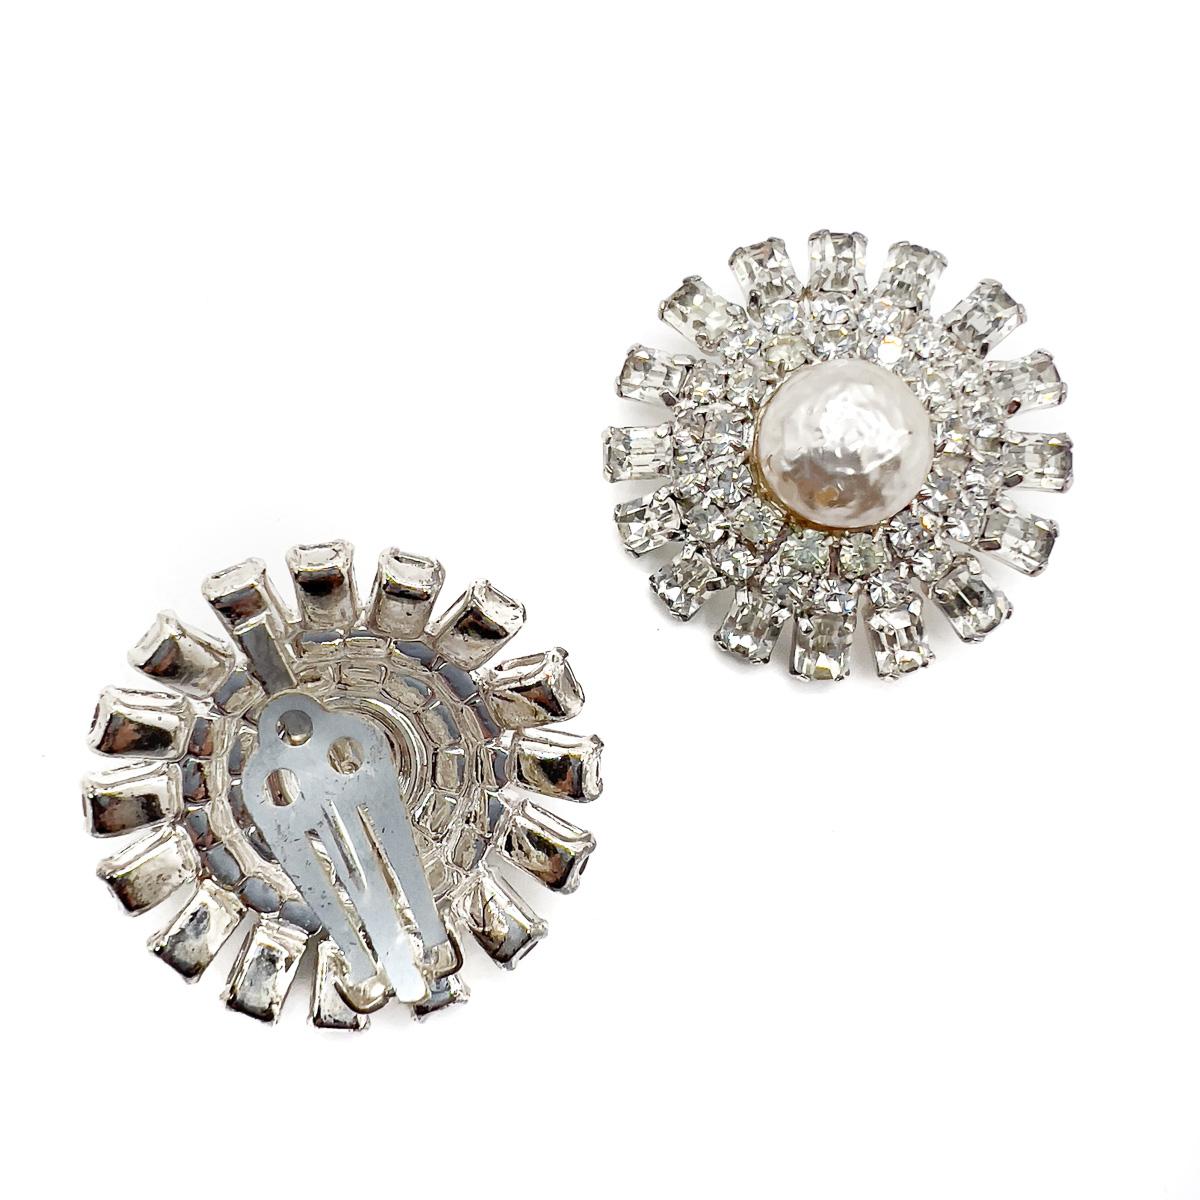 A pair of Vintage Pearl & Baguette Crystal Earrings. With a vibe of the silver screen, full of glamour and timelessly feminine, these earrings with their baroque pearls and baguette cut crystals will undoubtedly prove a style hero in your jewel